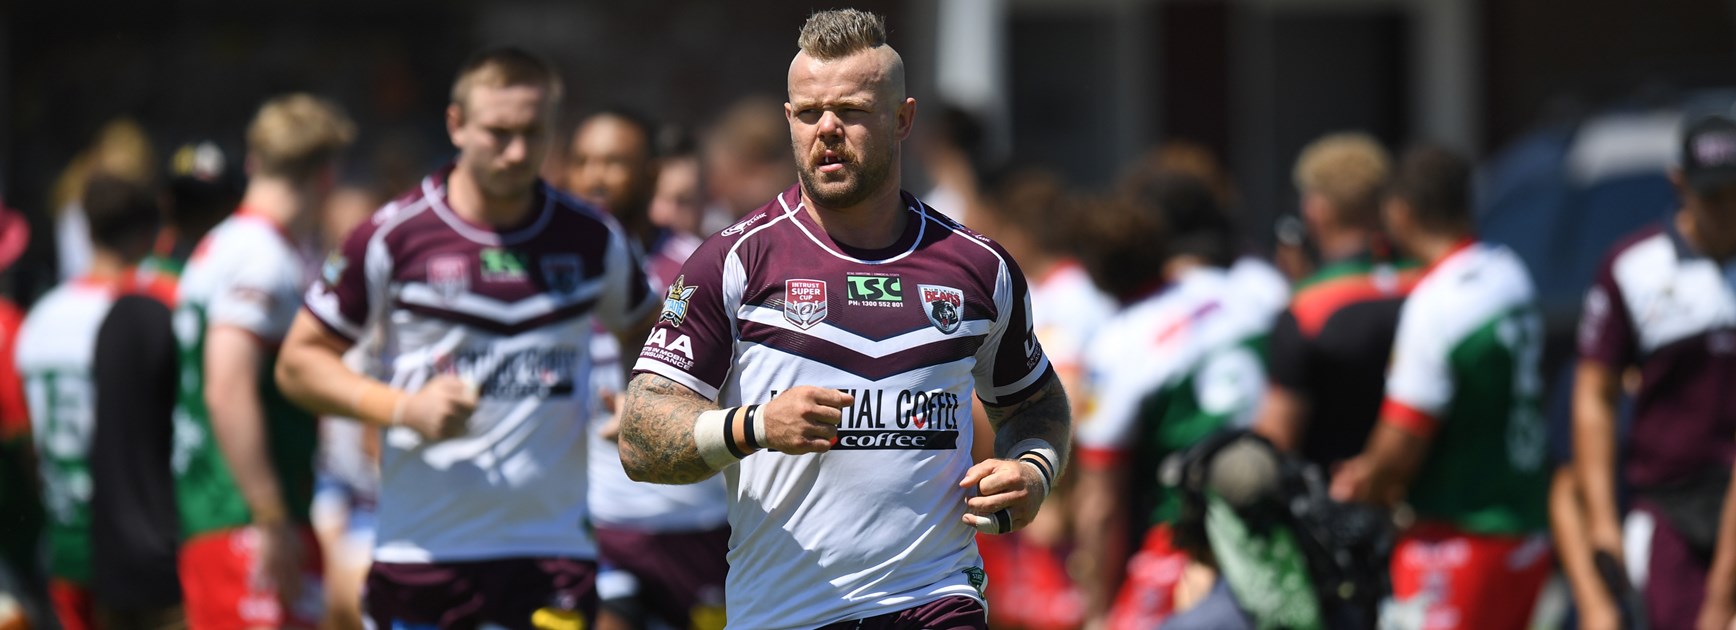 DJ prop Luke Page keen to tune up Warriors and NRL